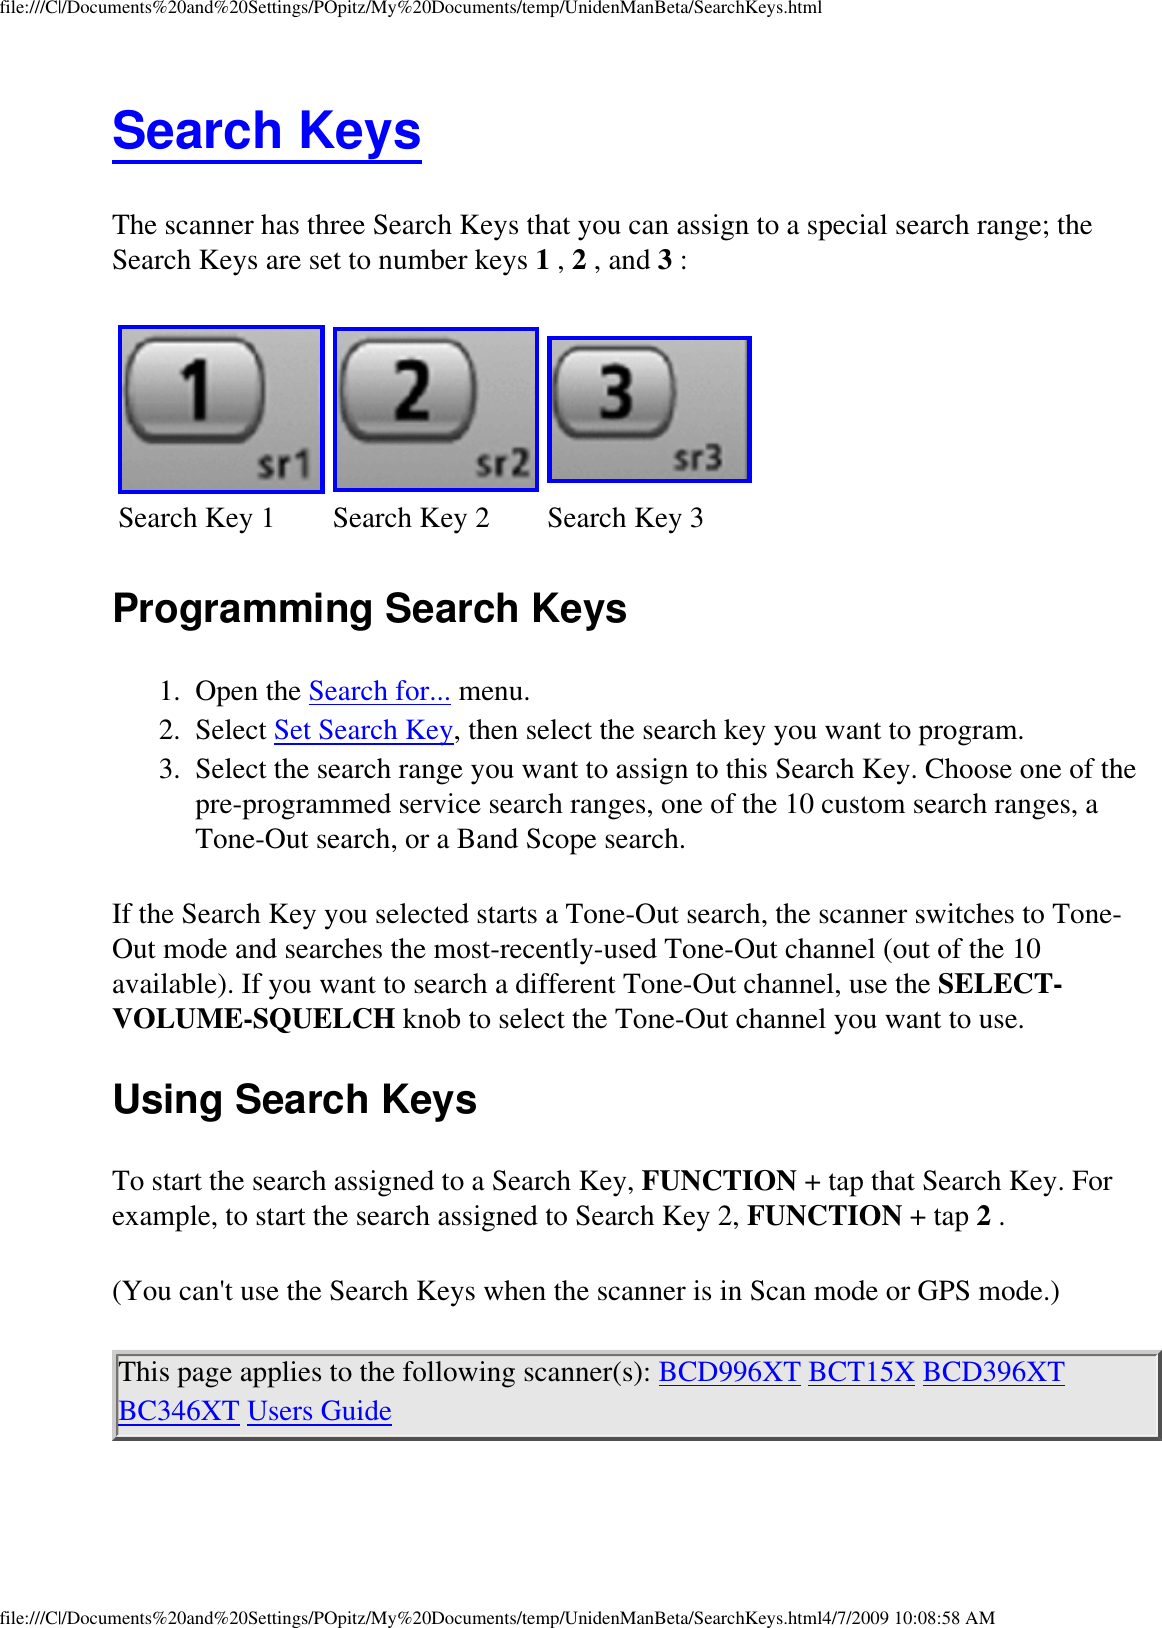 file:///C|/Documents%20and%20Settings/POpitz/My%20Documents/temp/UnidenManBeta/SearchKeys.htmlSearch Keys The scanner has three Search Keys that you can assign to a special search range; the Search Keys are set to number keys 1 , 2 , and 3 : Search Key 1 Search Key 2 Search Key 3Programming Search Keys 1.  Open the Search for... menu. 2.  Select Set Search Key, then select the search key you want to program. 3.  Select the search range you want to assign to this Search Key. Choose one of the pre-programmed service search ranges, one of the 10 custom search ranges, a Tone-Out search, or a Band Scope search. If the Search Key you selected starts a Tone-Out search, the scanner switches to Tone-Out mode and searches the most-recently-used Tone-Out channel (out of the 10 available). If you want to search a different Tone-Out channel, use the SELECT-VOLUME-SQUELCH knob to select the Tone-Out channel you want to use. Using Search Keys To start the search assigned to a Search Key, FUNCTION + tap that Search Key. For example, to start the search assigned to Search Key 2, FUNCTION + tap 2 . (You can&apos;t use the Search Keys when the scanner is in Scan mode or GPS mode.) This page applies to the following scanner(s): BCD996XT BCT15X BCD396XT BC346XT Users Guide file:///C|/Documents%20and%20Settings/POpitz/My%20Documents/temp/UnidenManBeta/SearchKeys.html4/7/2009 10:08:58 AM